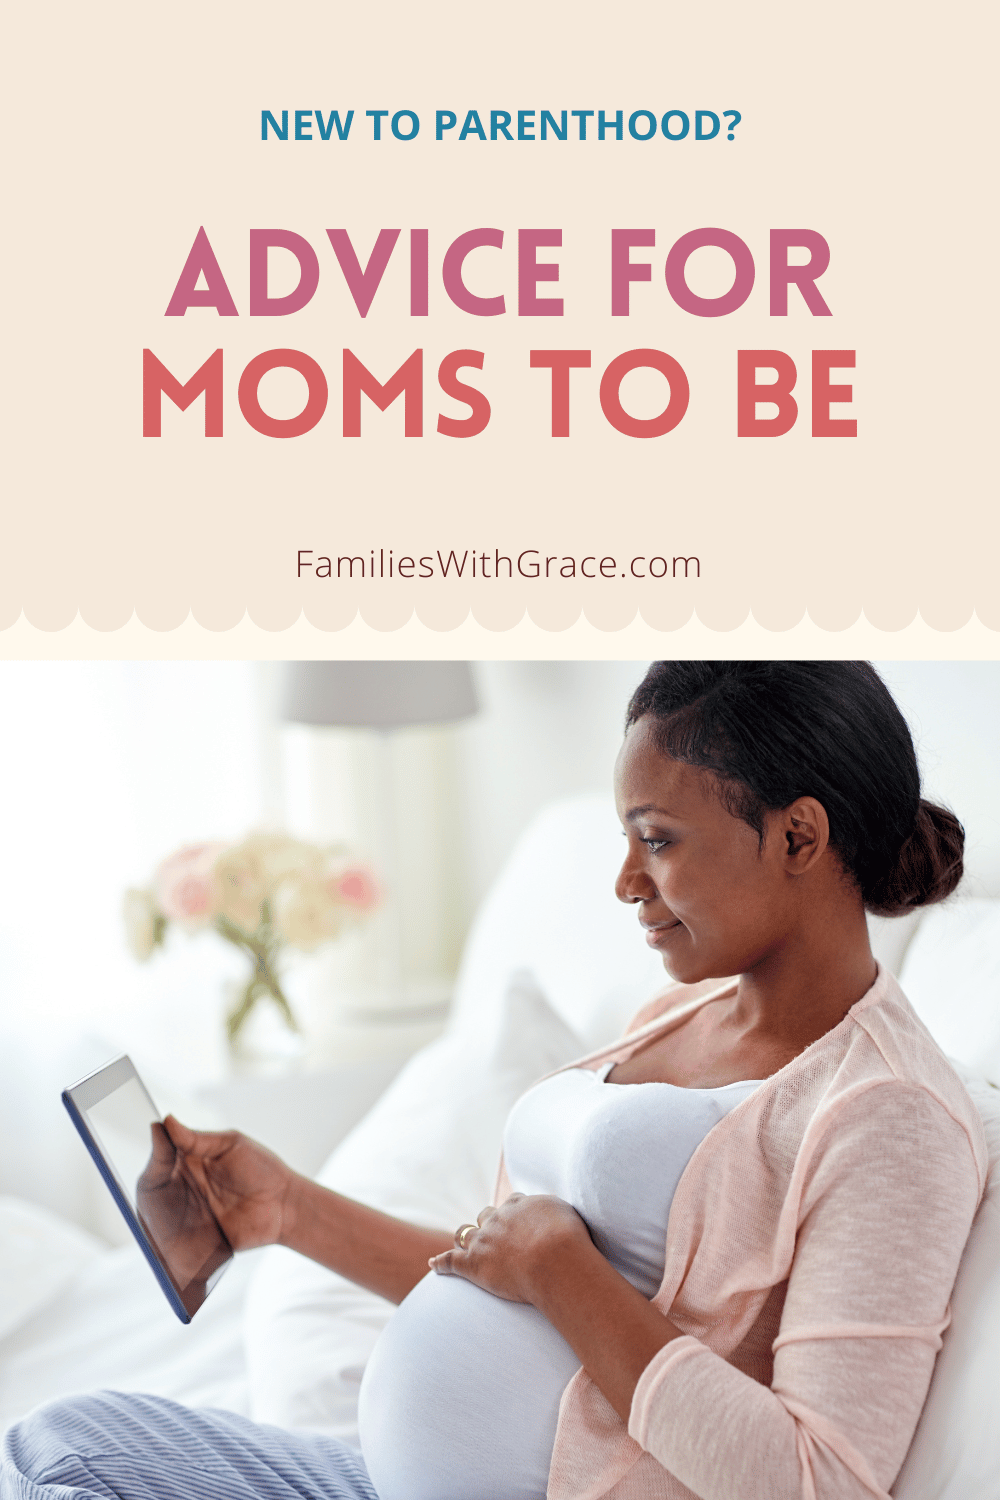 Advice for moms to be